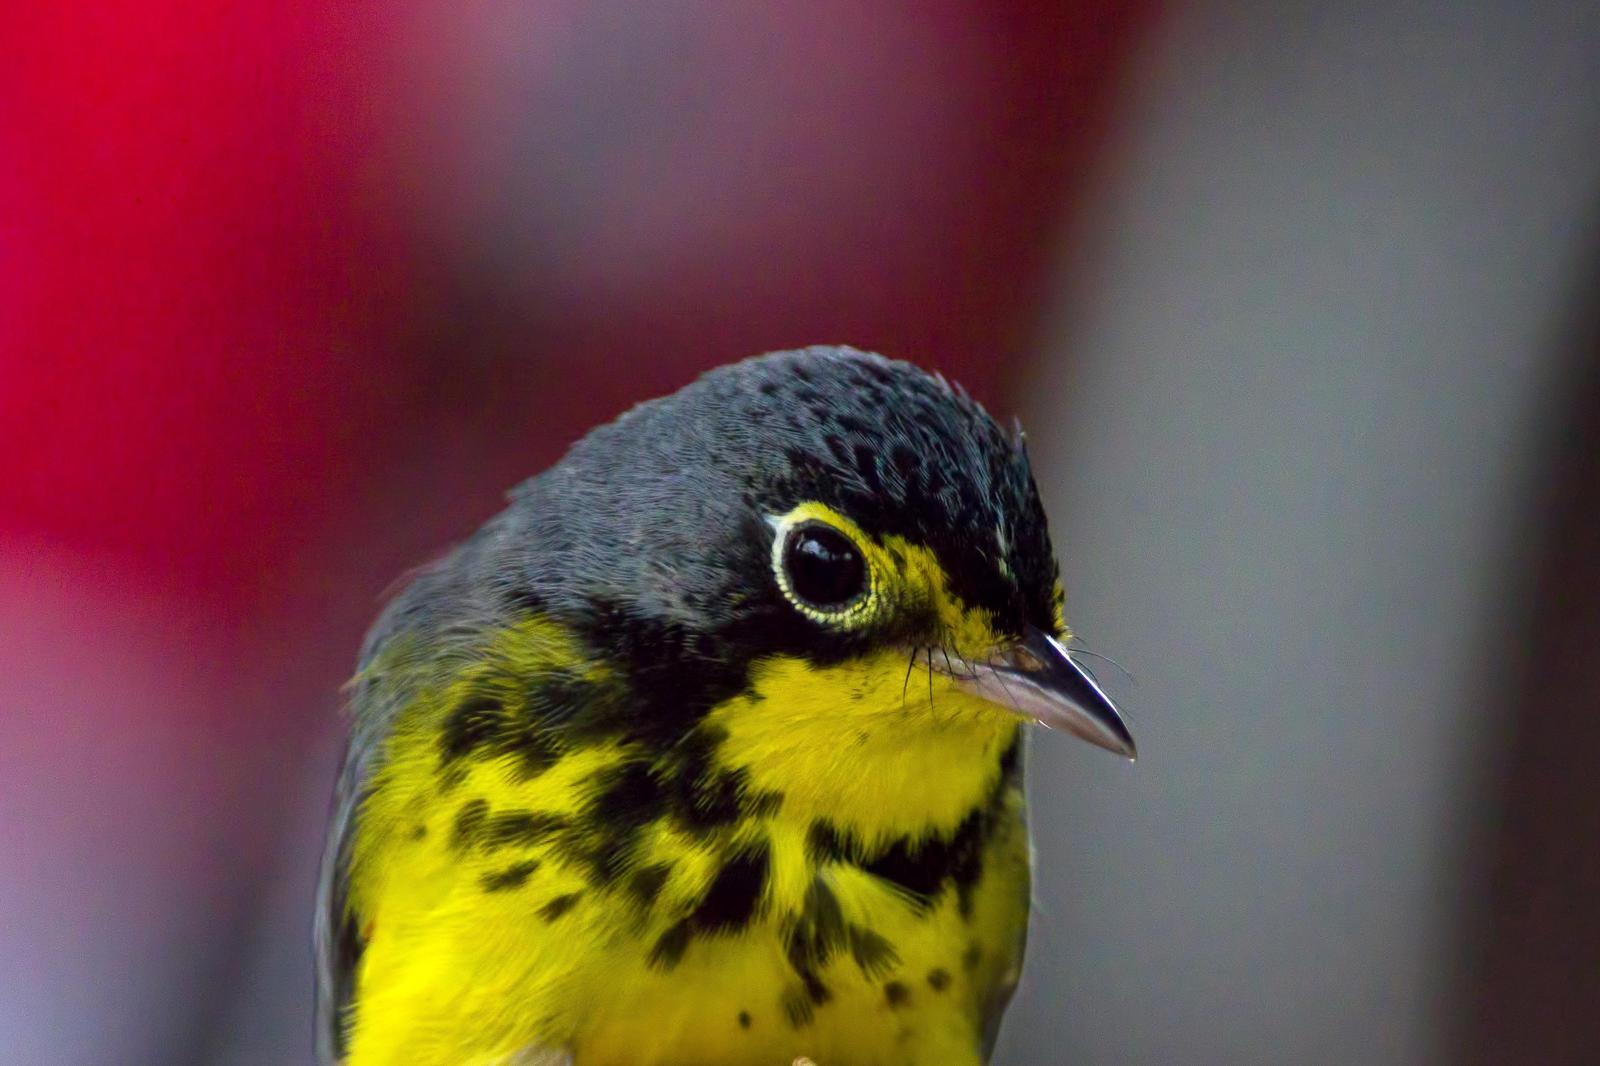 Canada Warbler Photo by Rob Dickerson